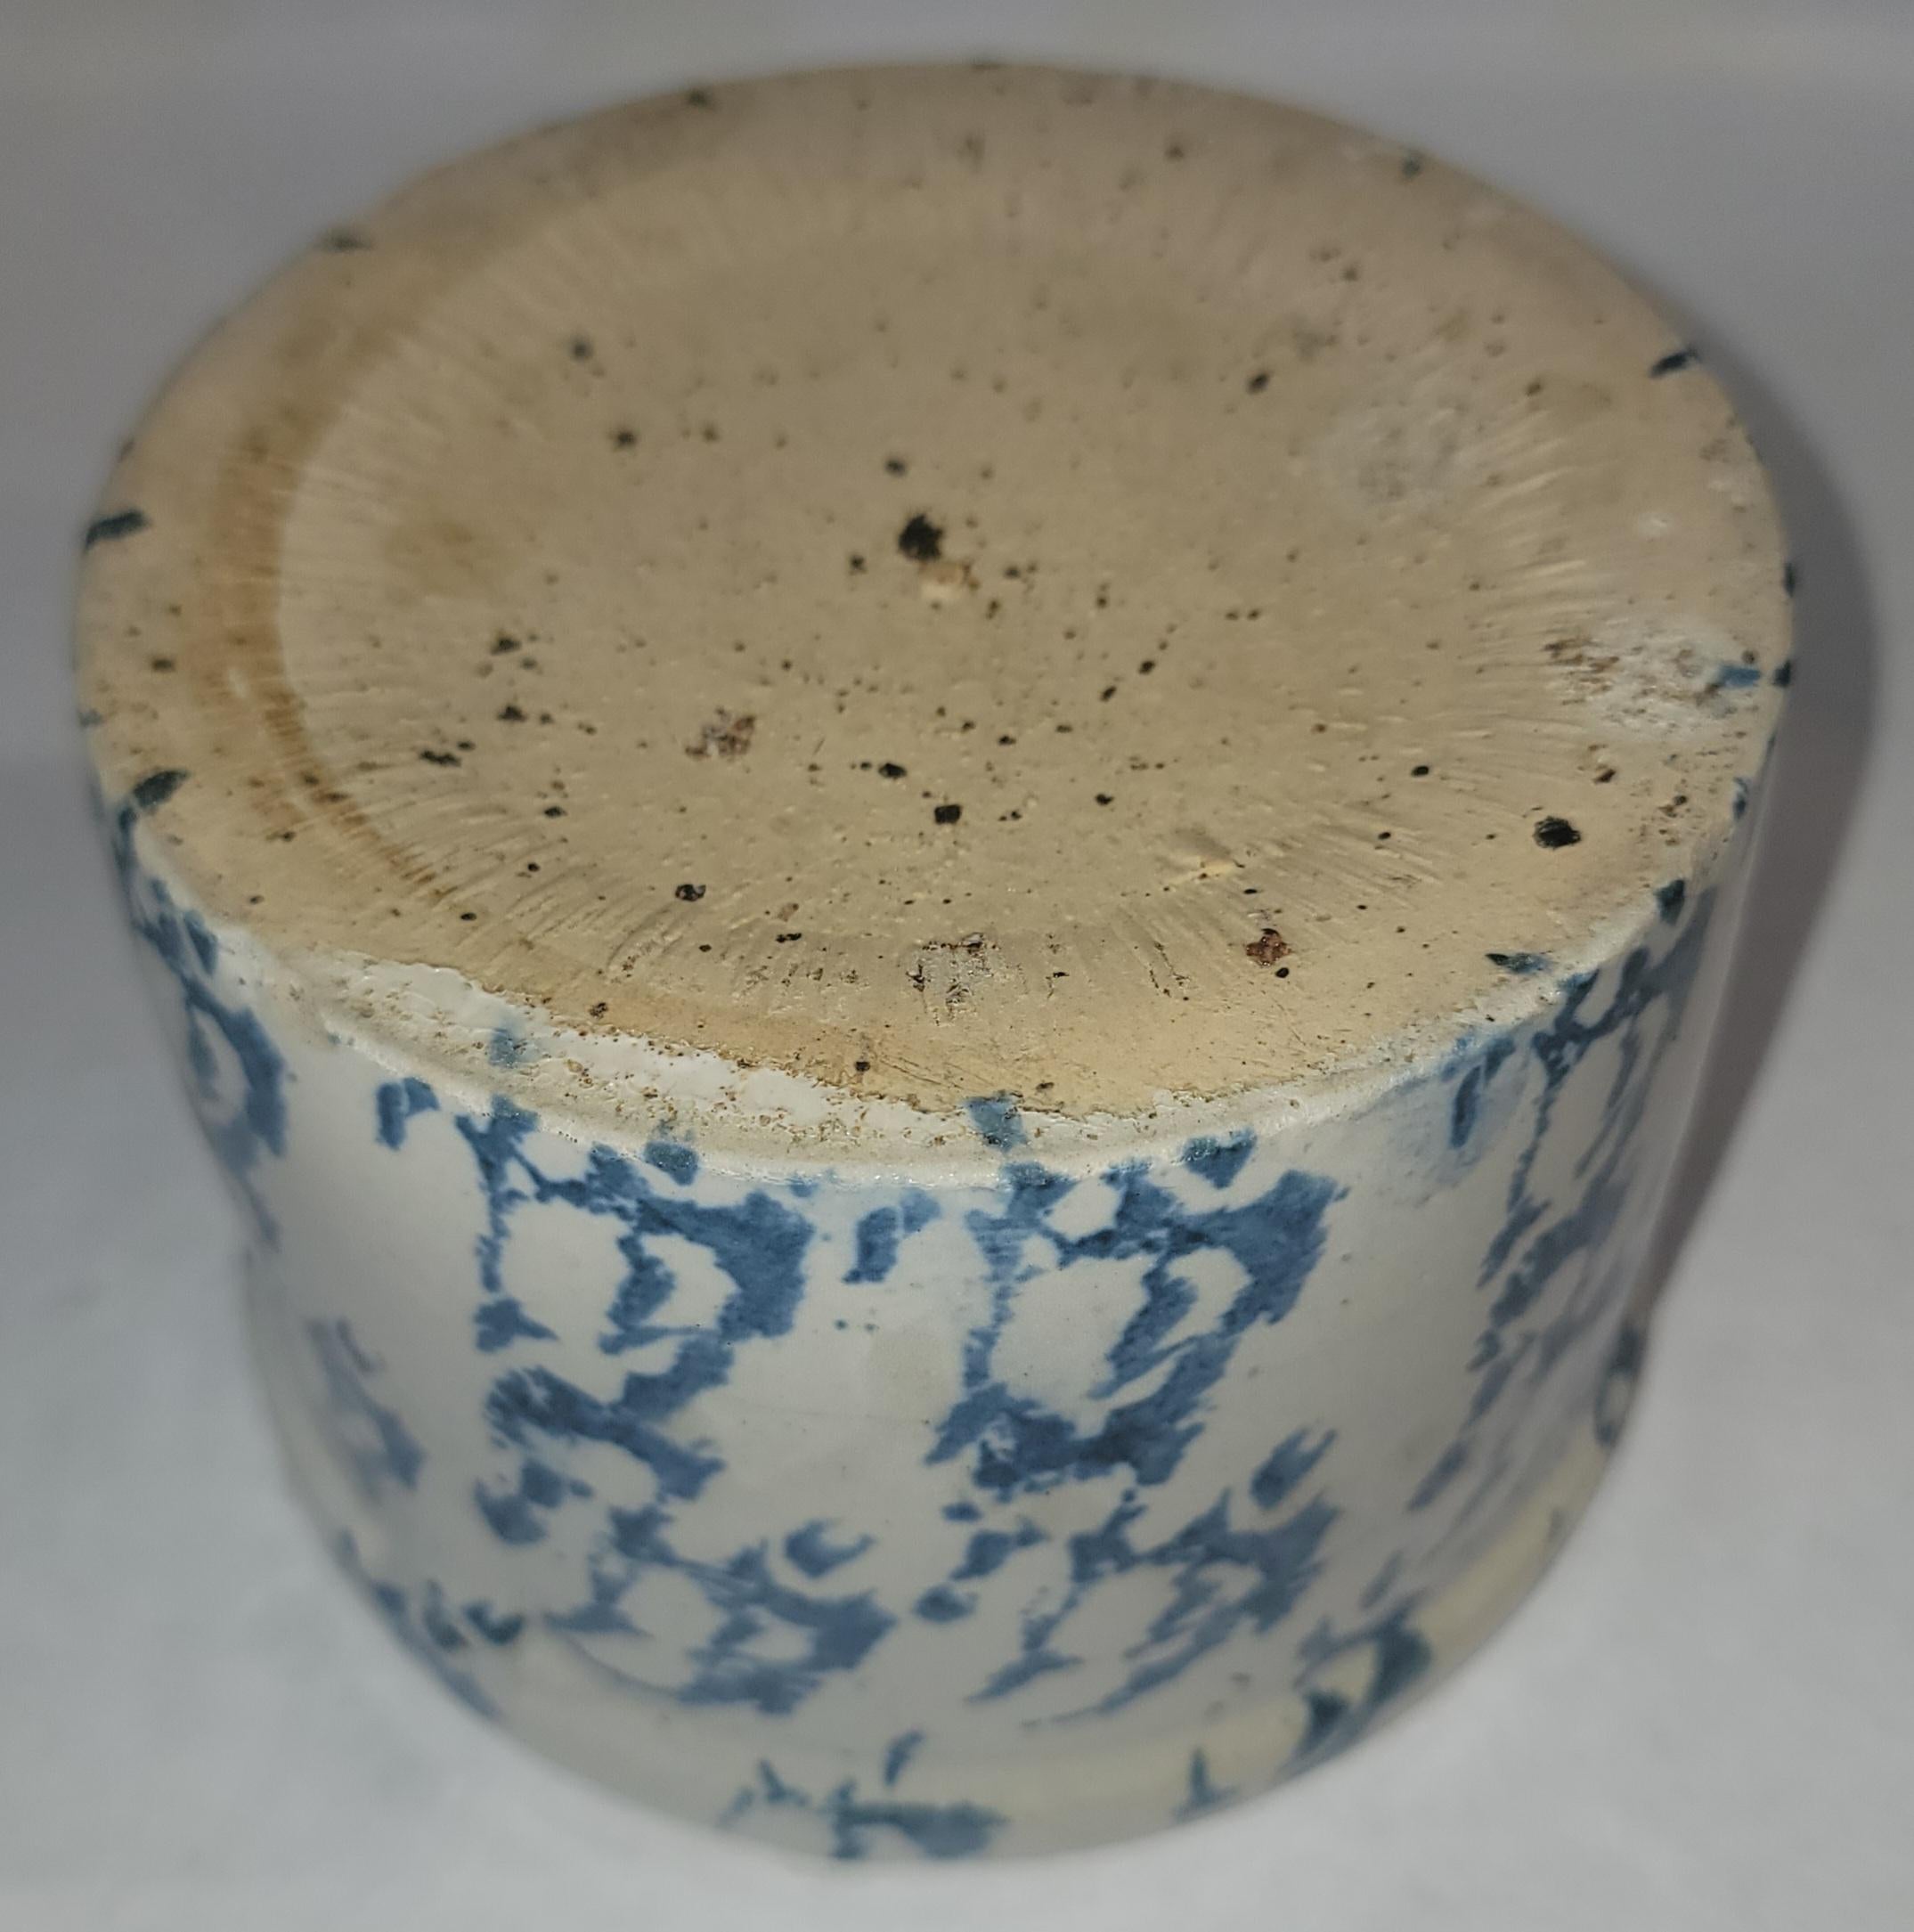 19thc Sponge lidded crock with light blue hand painted sponge design. Crock is in greet condition with wear from age and use. 